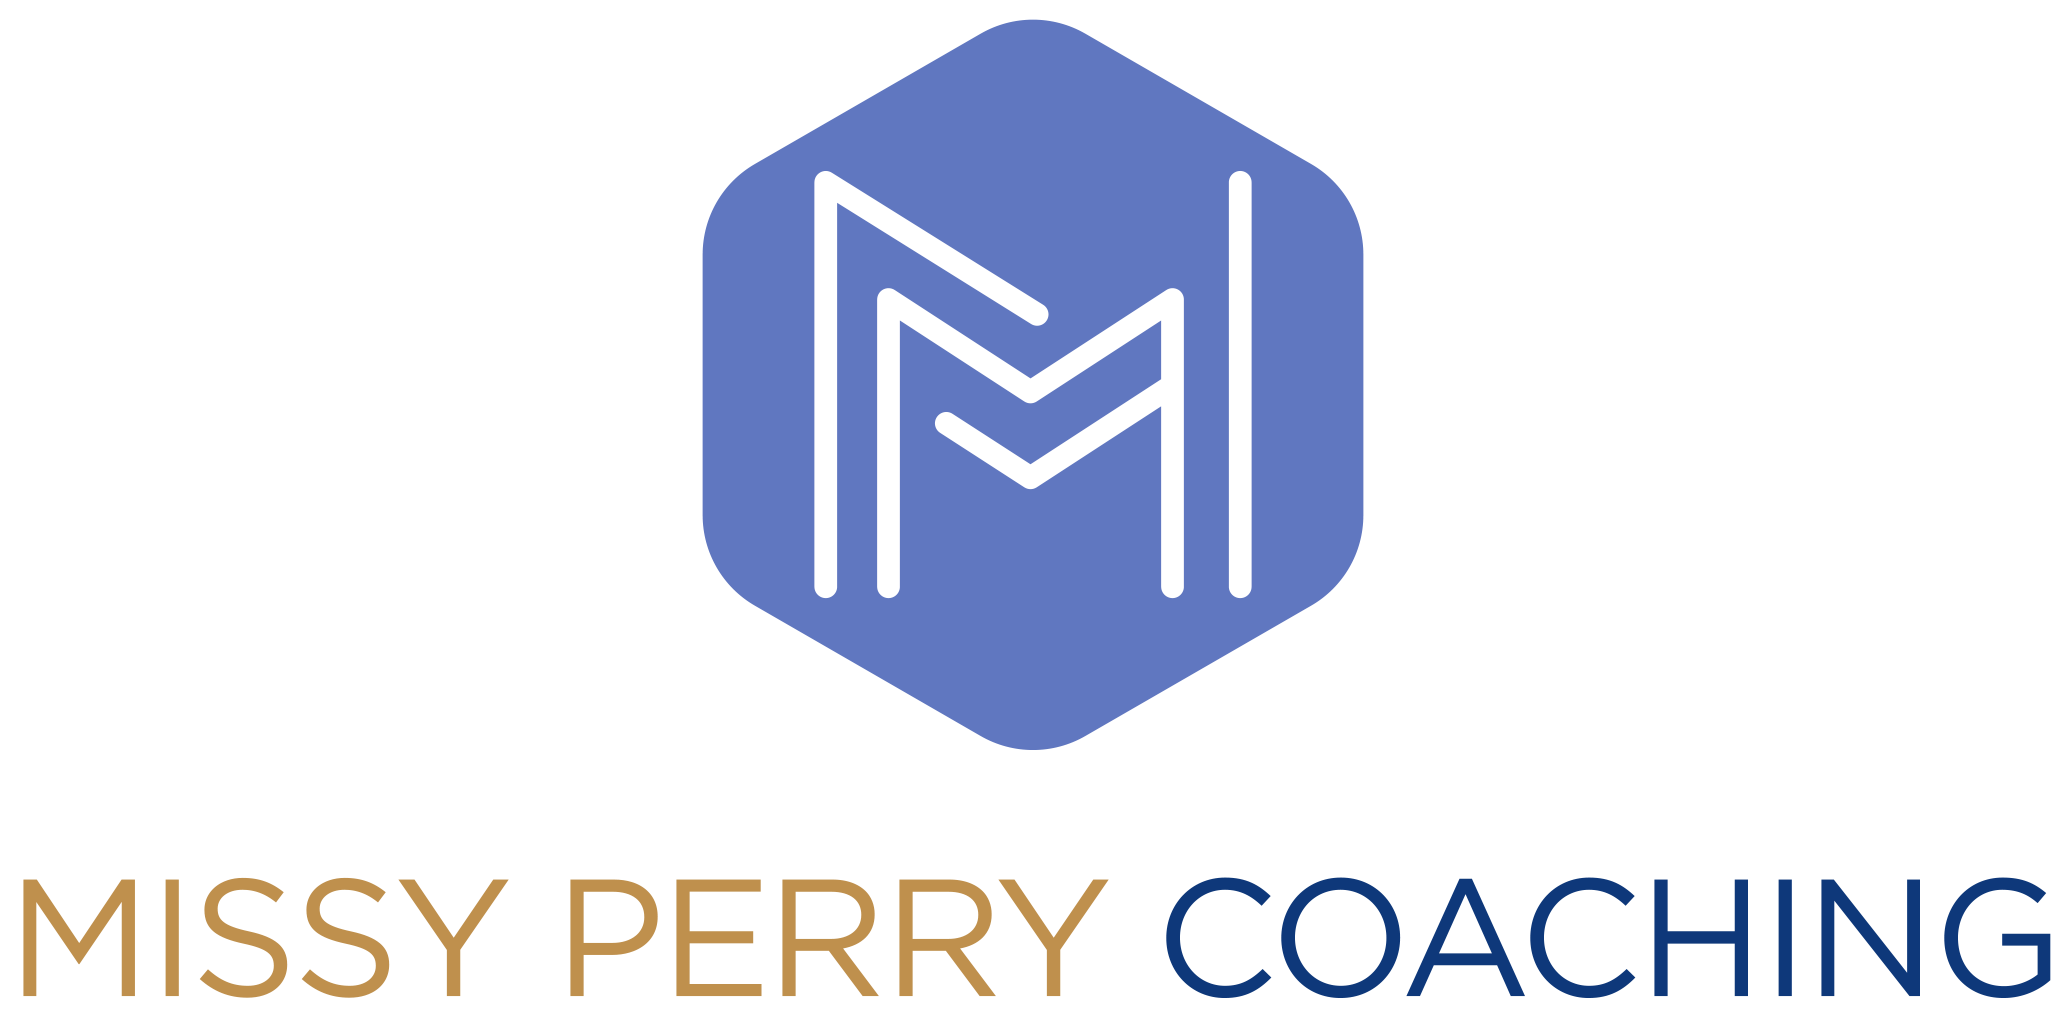 Missy Perry Coaching